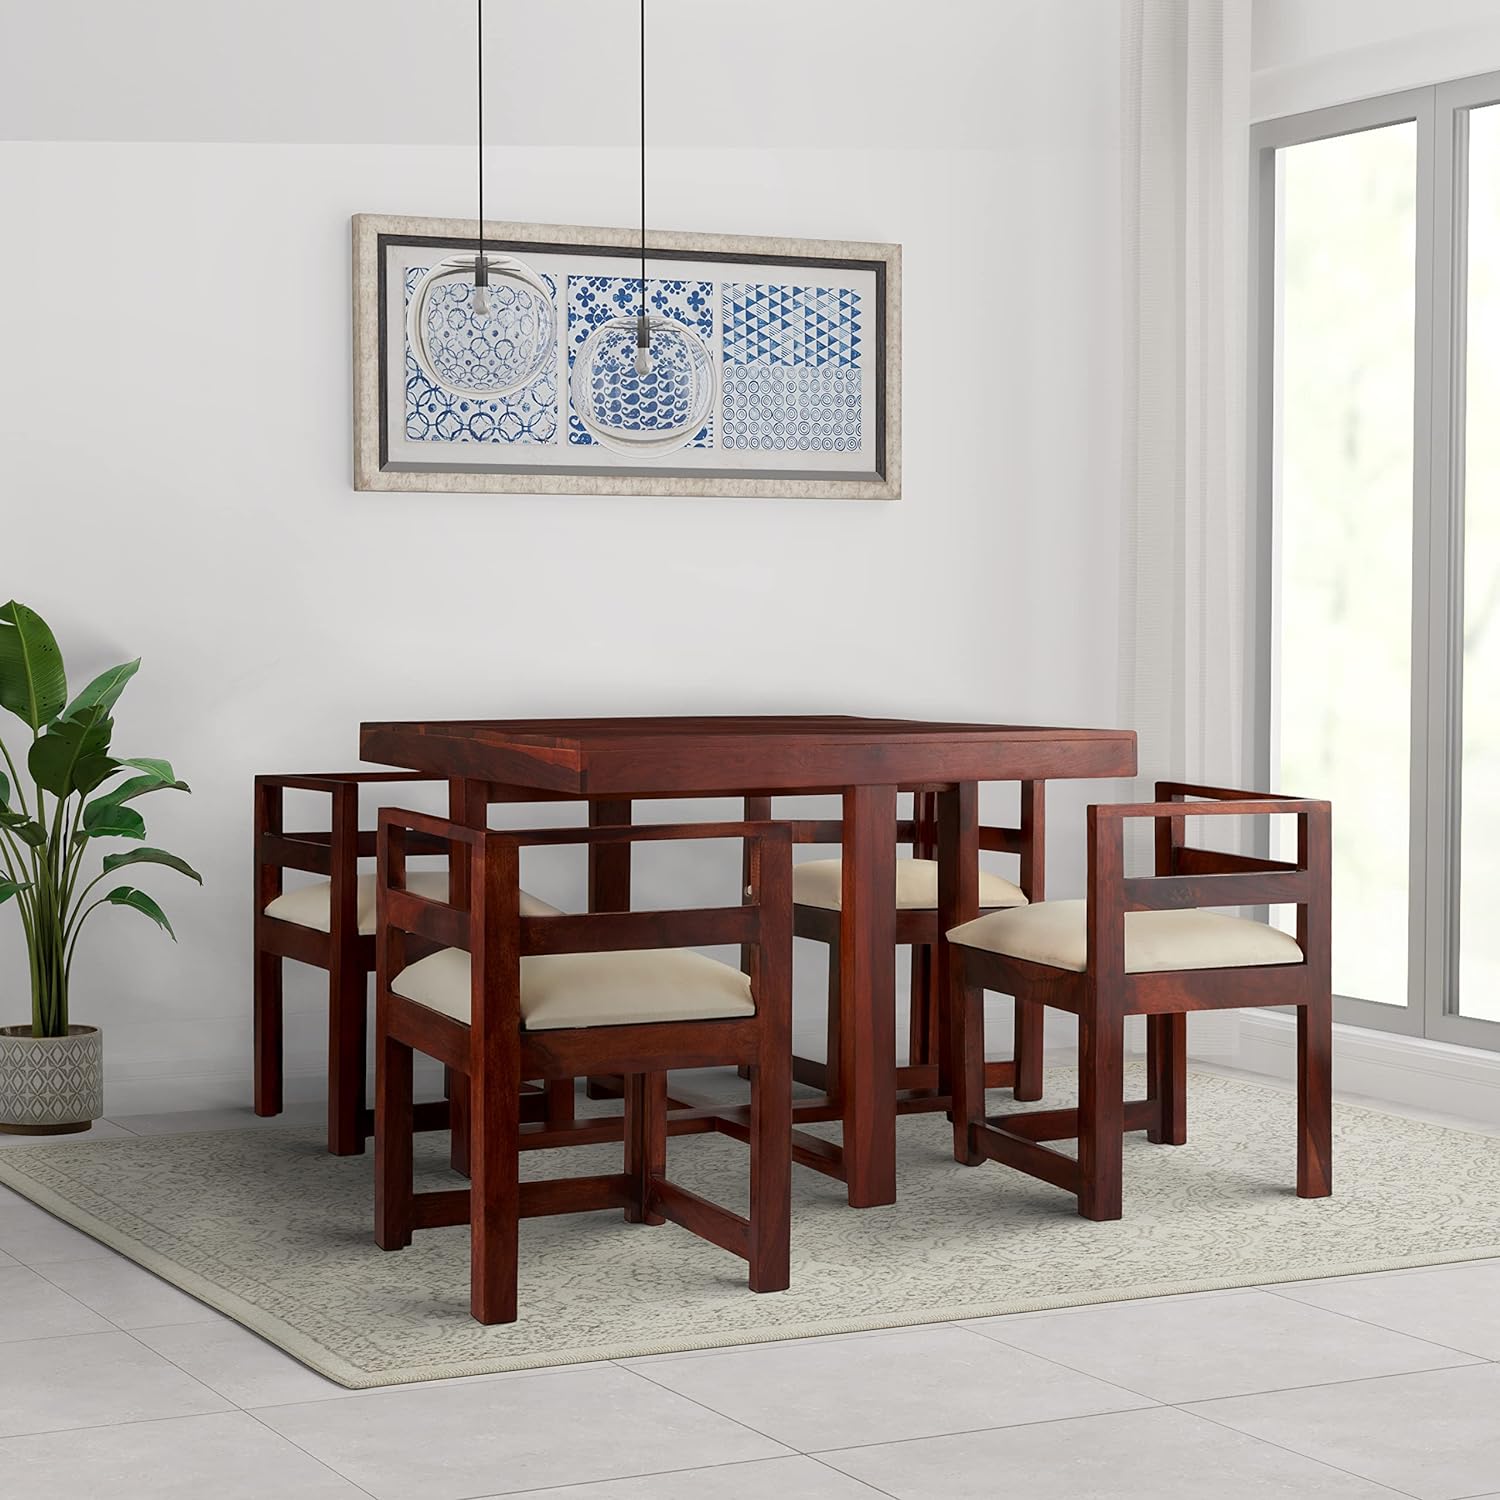 Solid Sheesham Wood Melka Modern 4 Seater Dining Table with 4 Cushioned Chairs